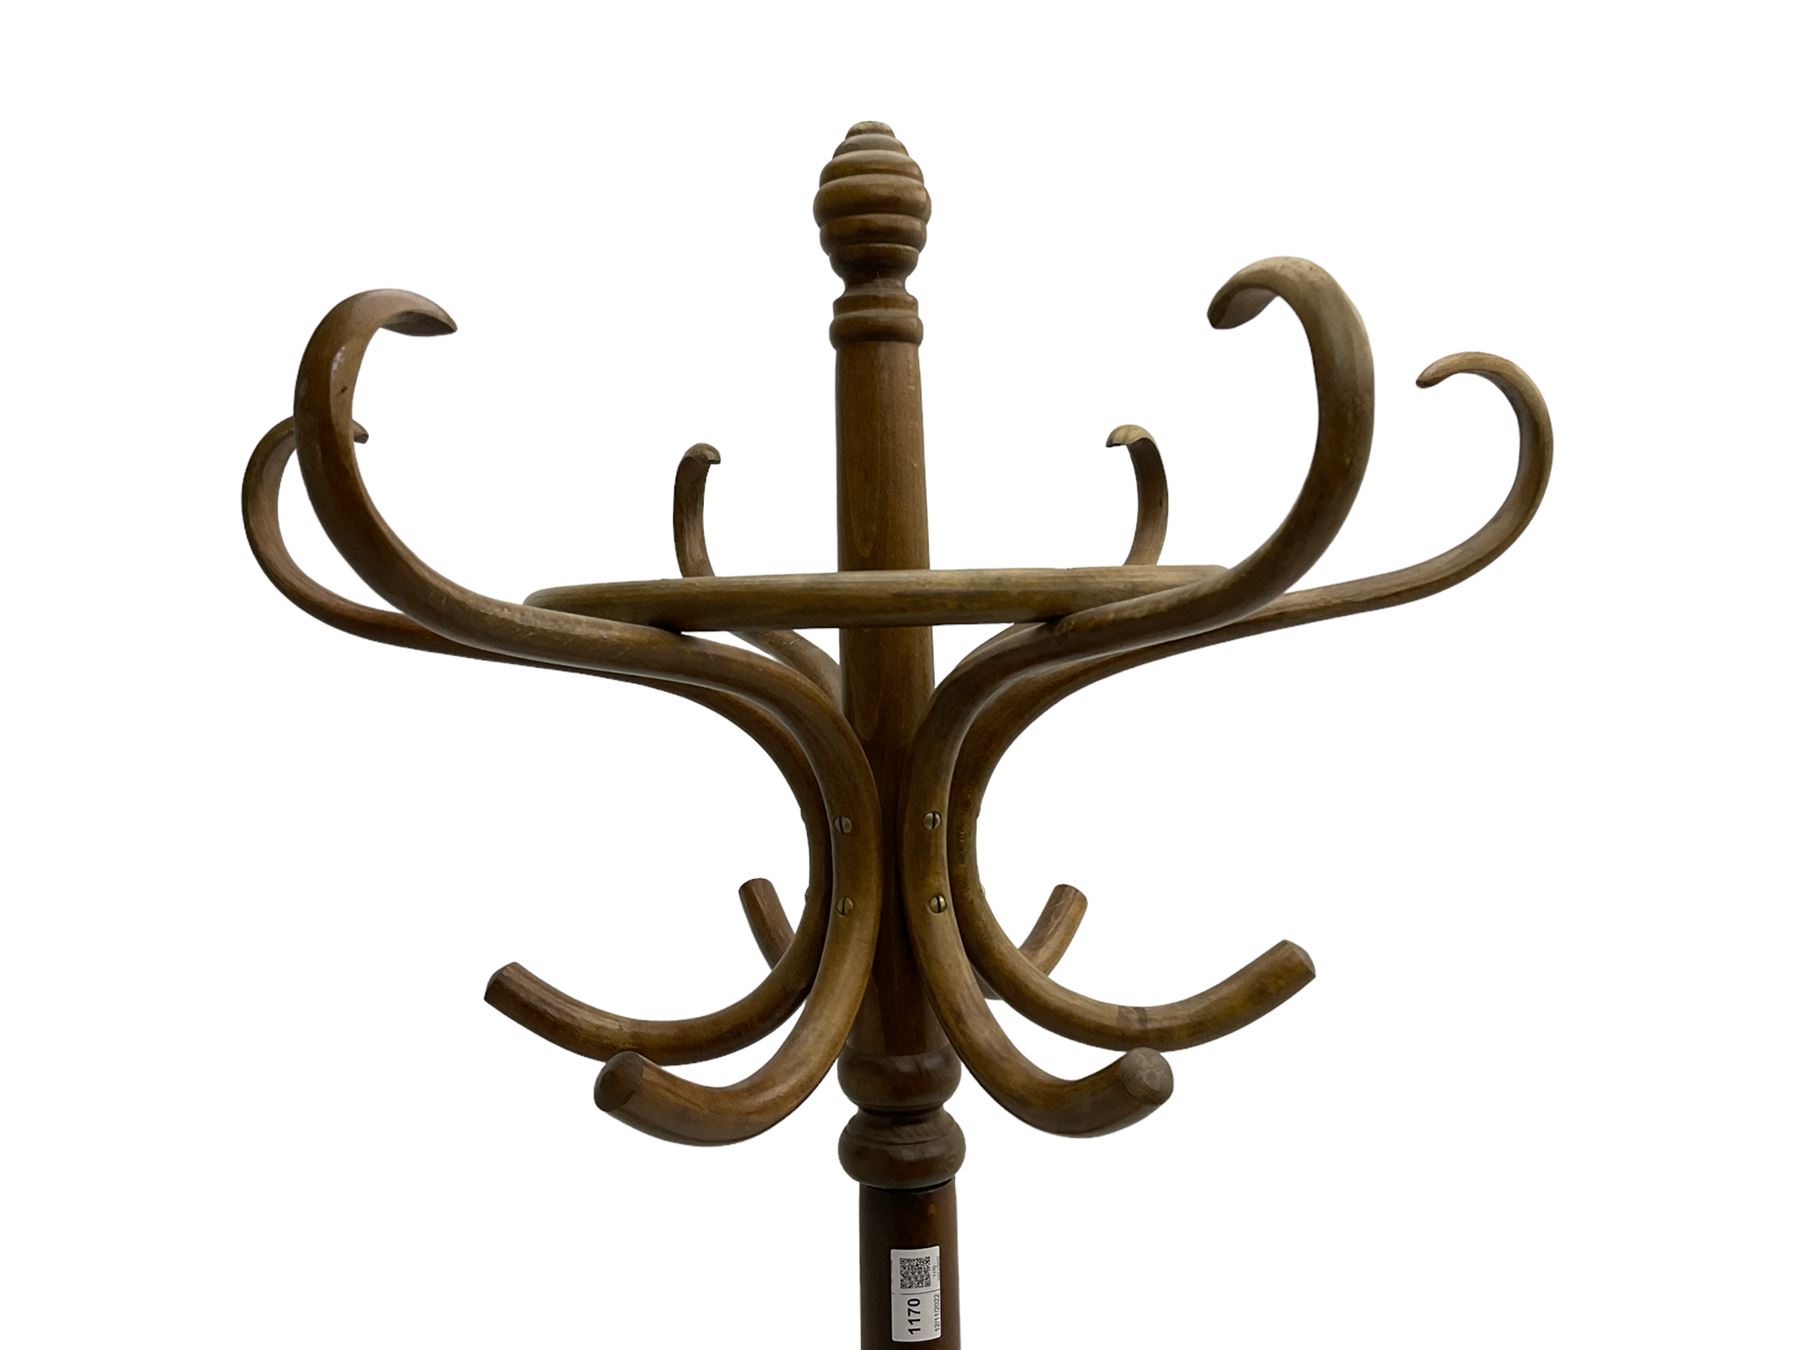 Mid-20th century bentwood hat and coat stand - Image 4 of 6